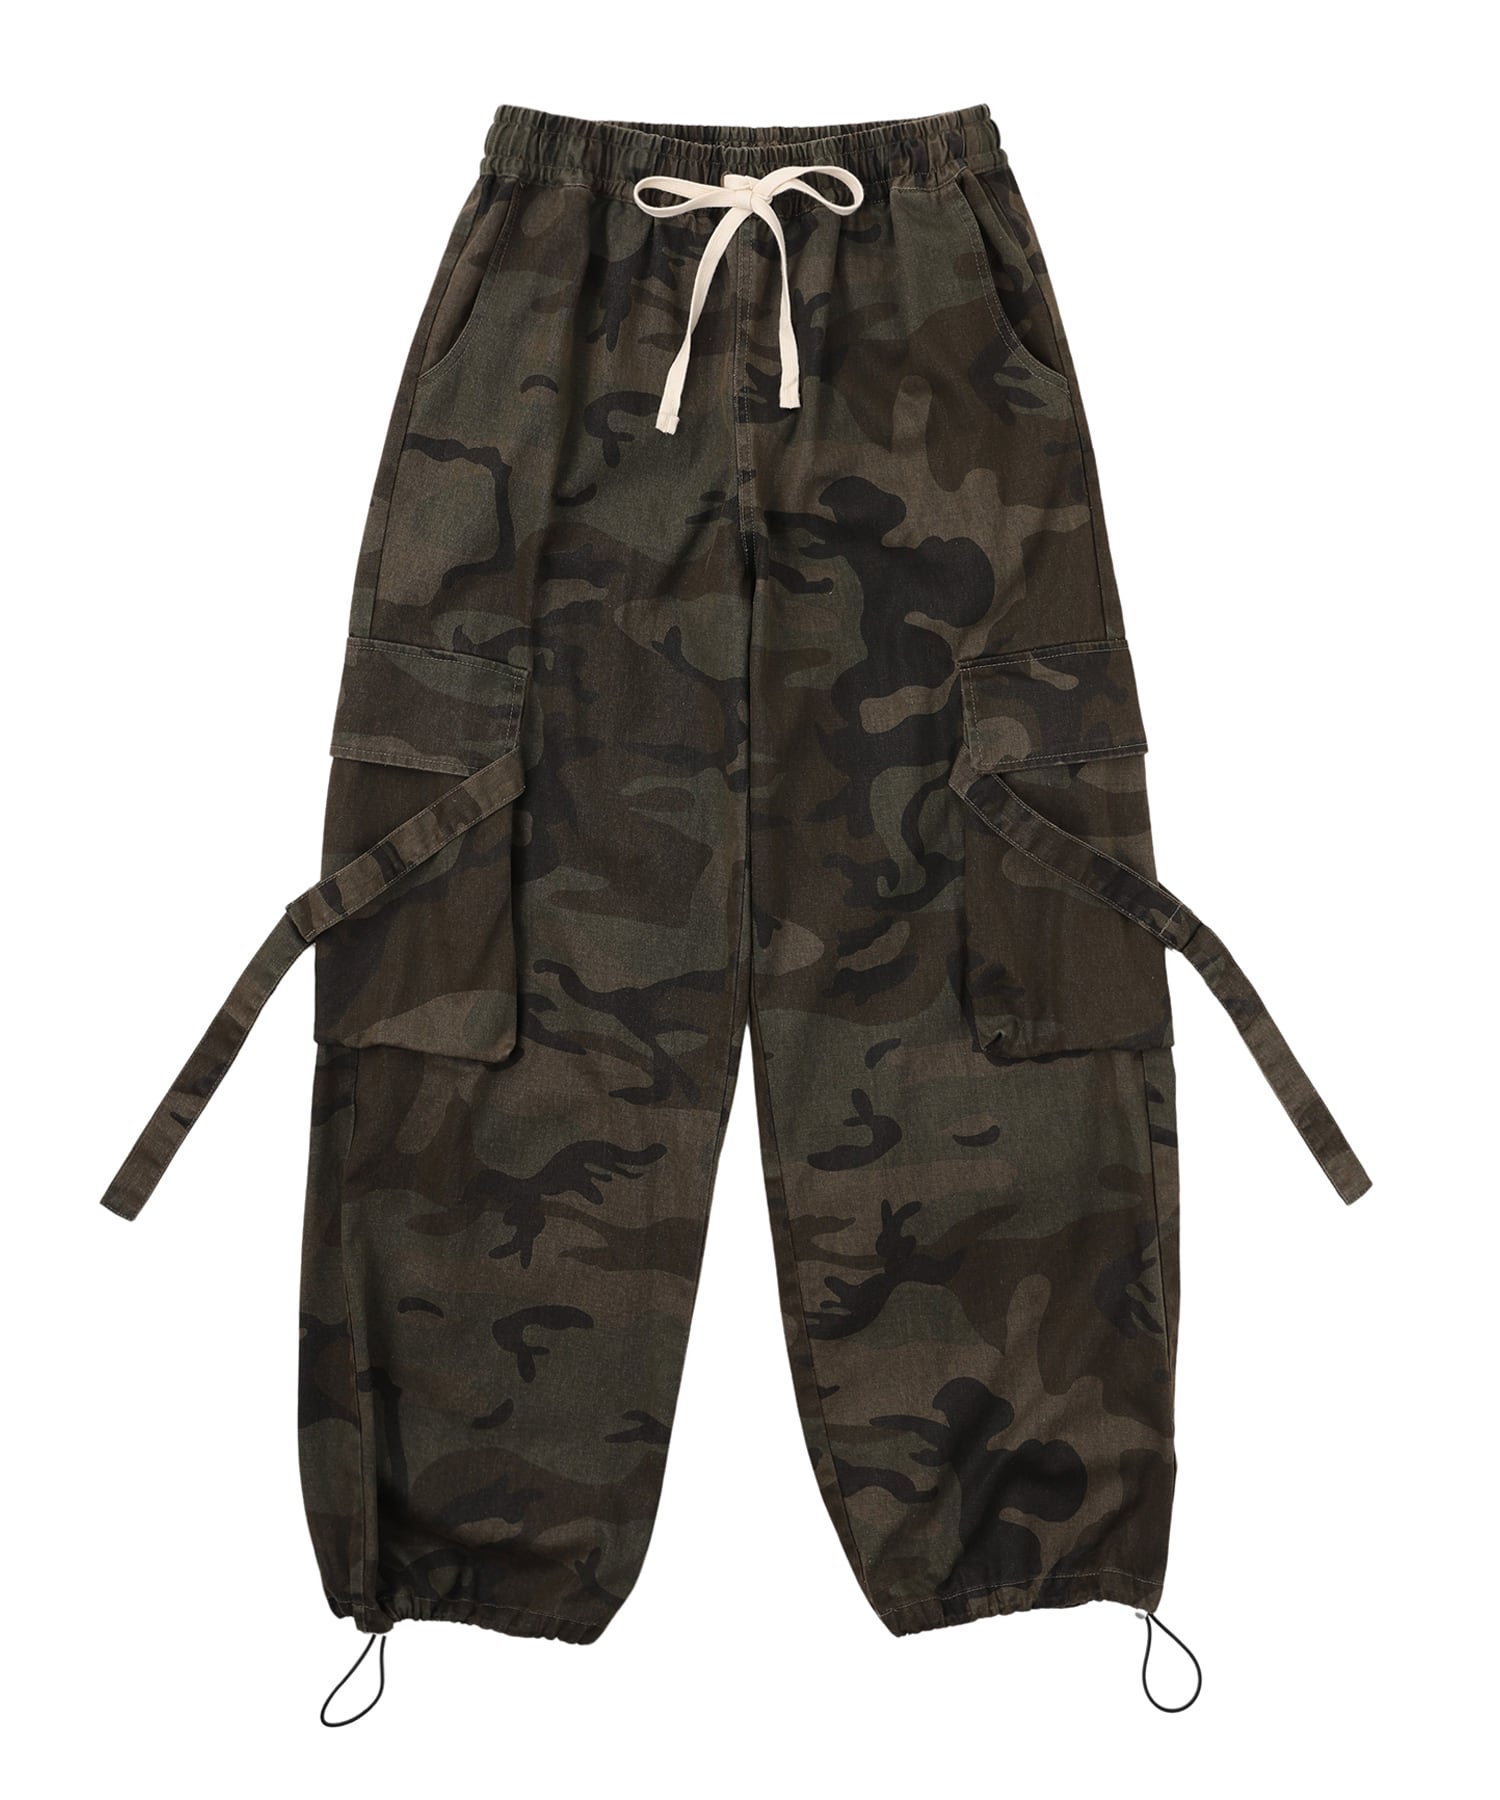 Drost military wide pants